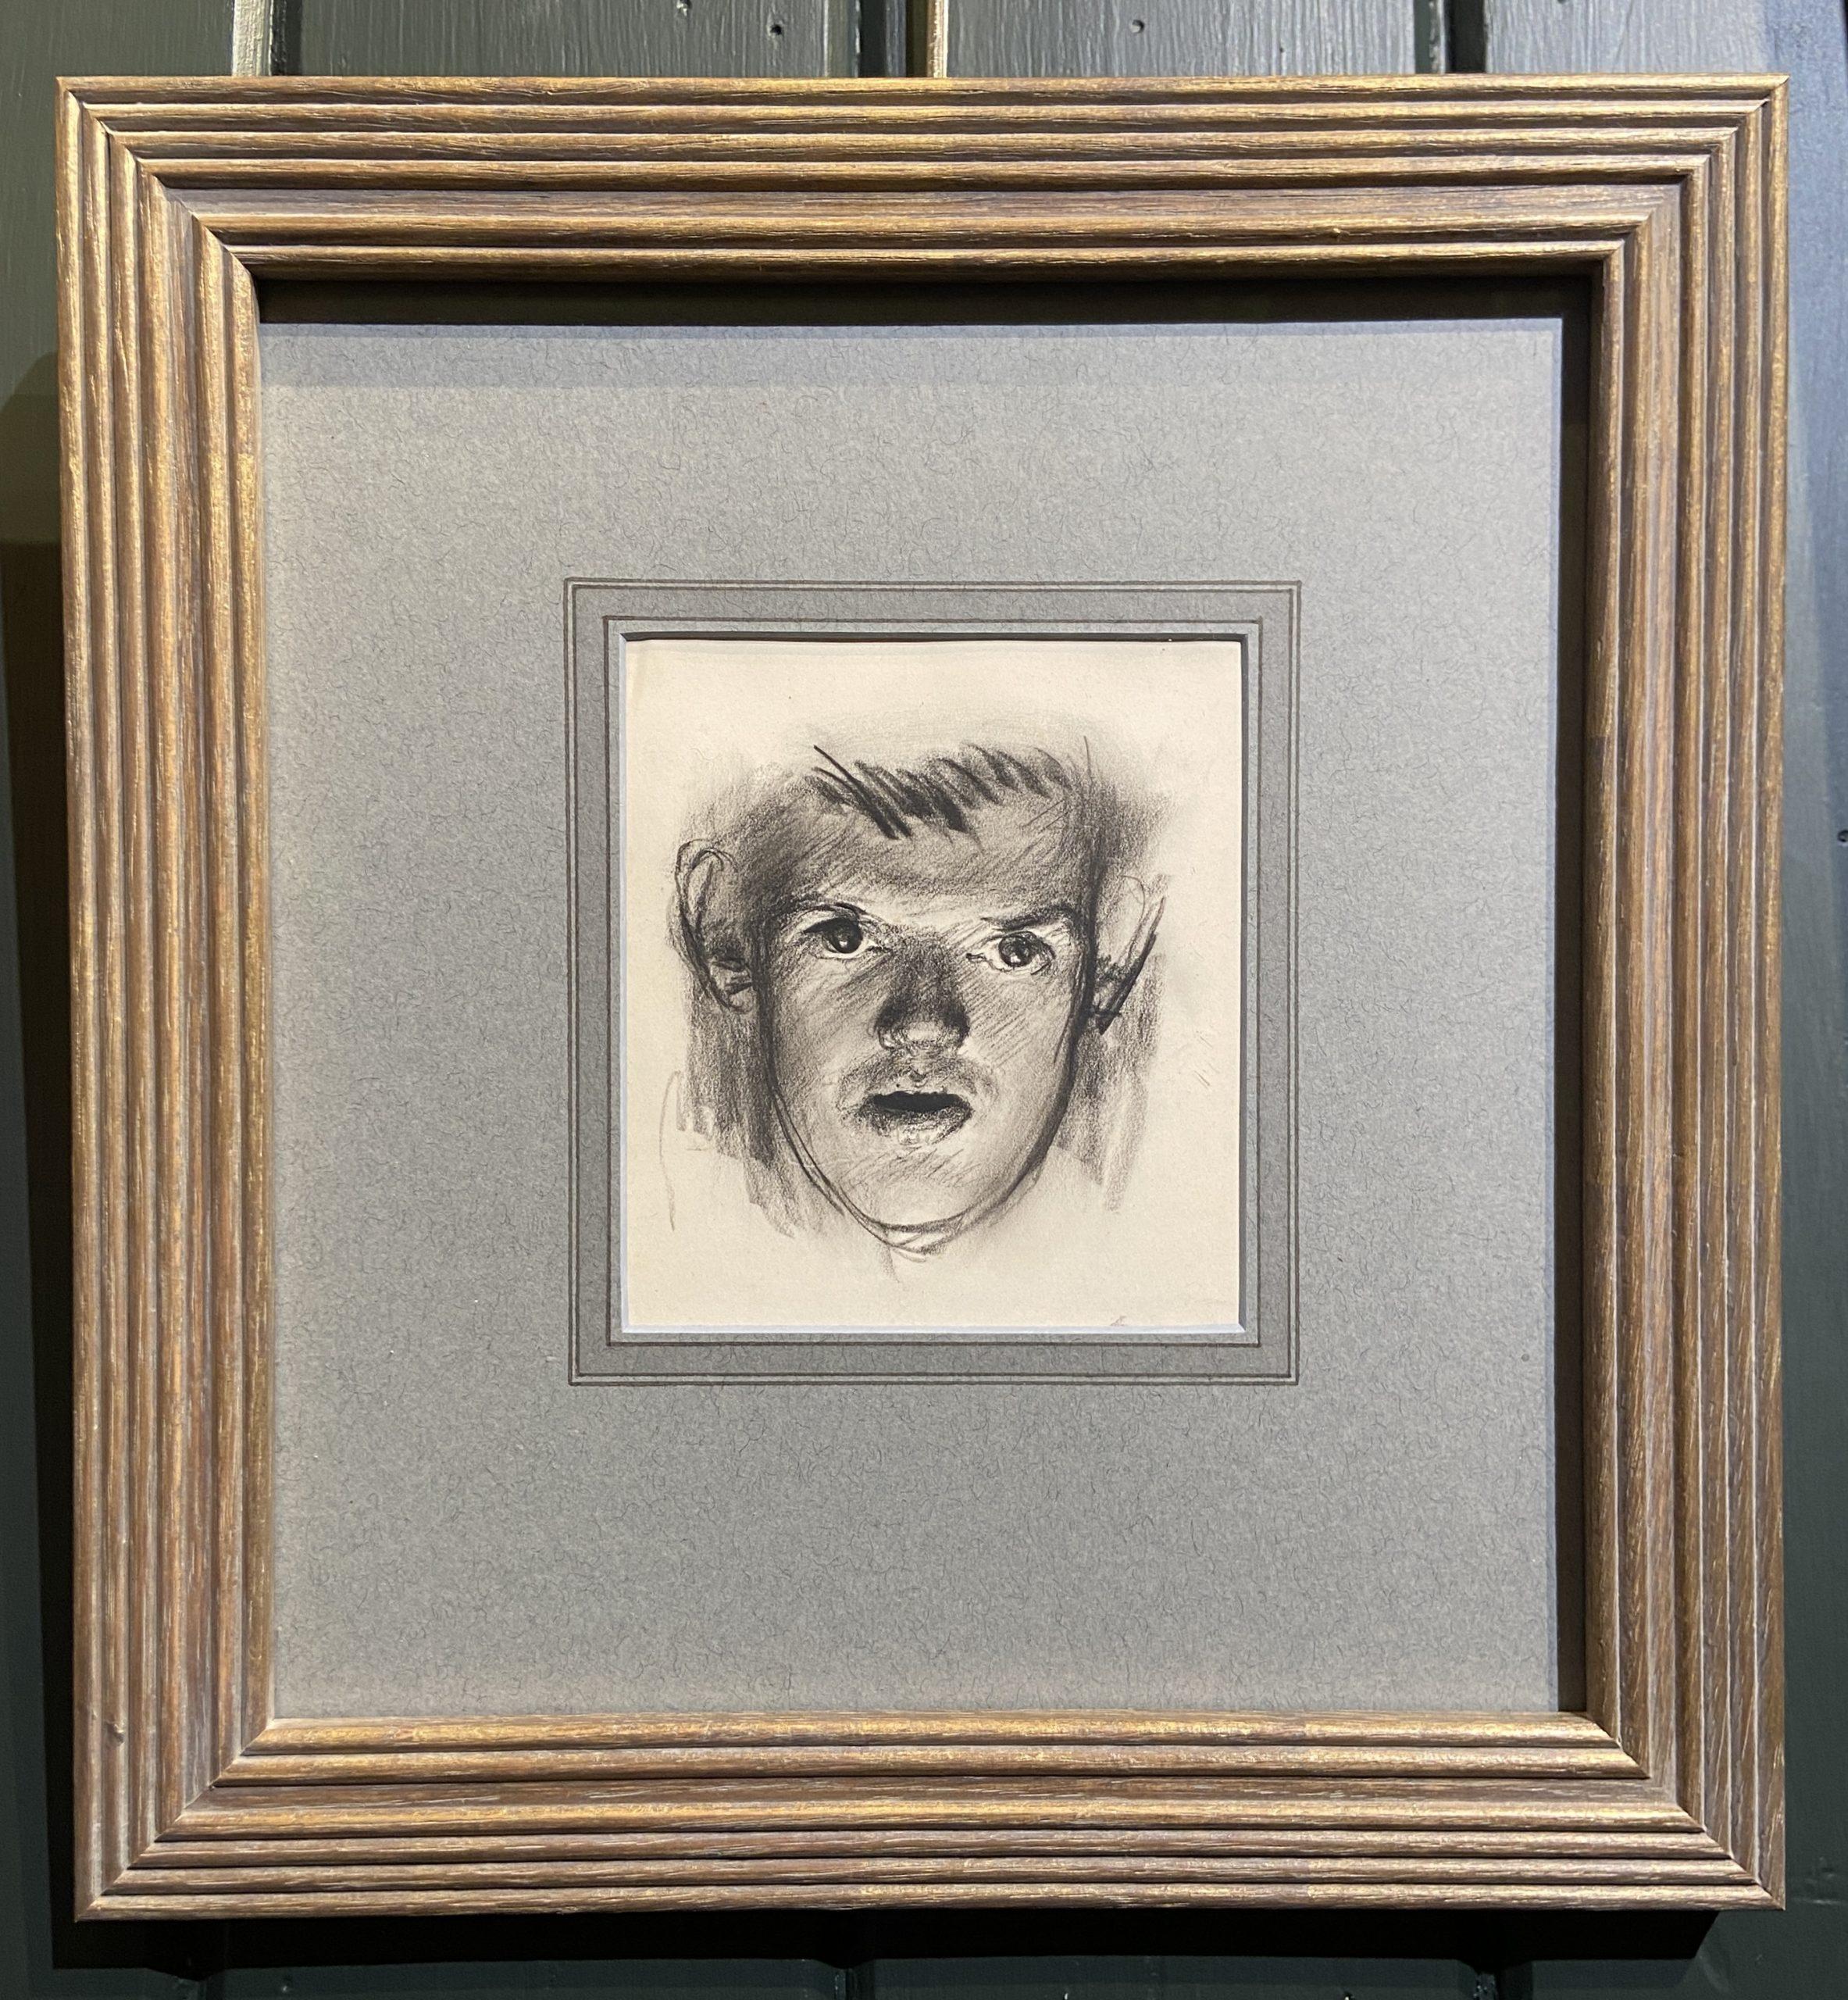 Self Portrait, Charcoal on Paper, 20th Century British Drawing - Modern Art by William Dring